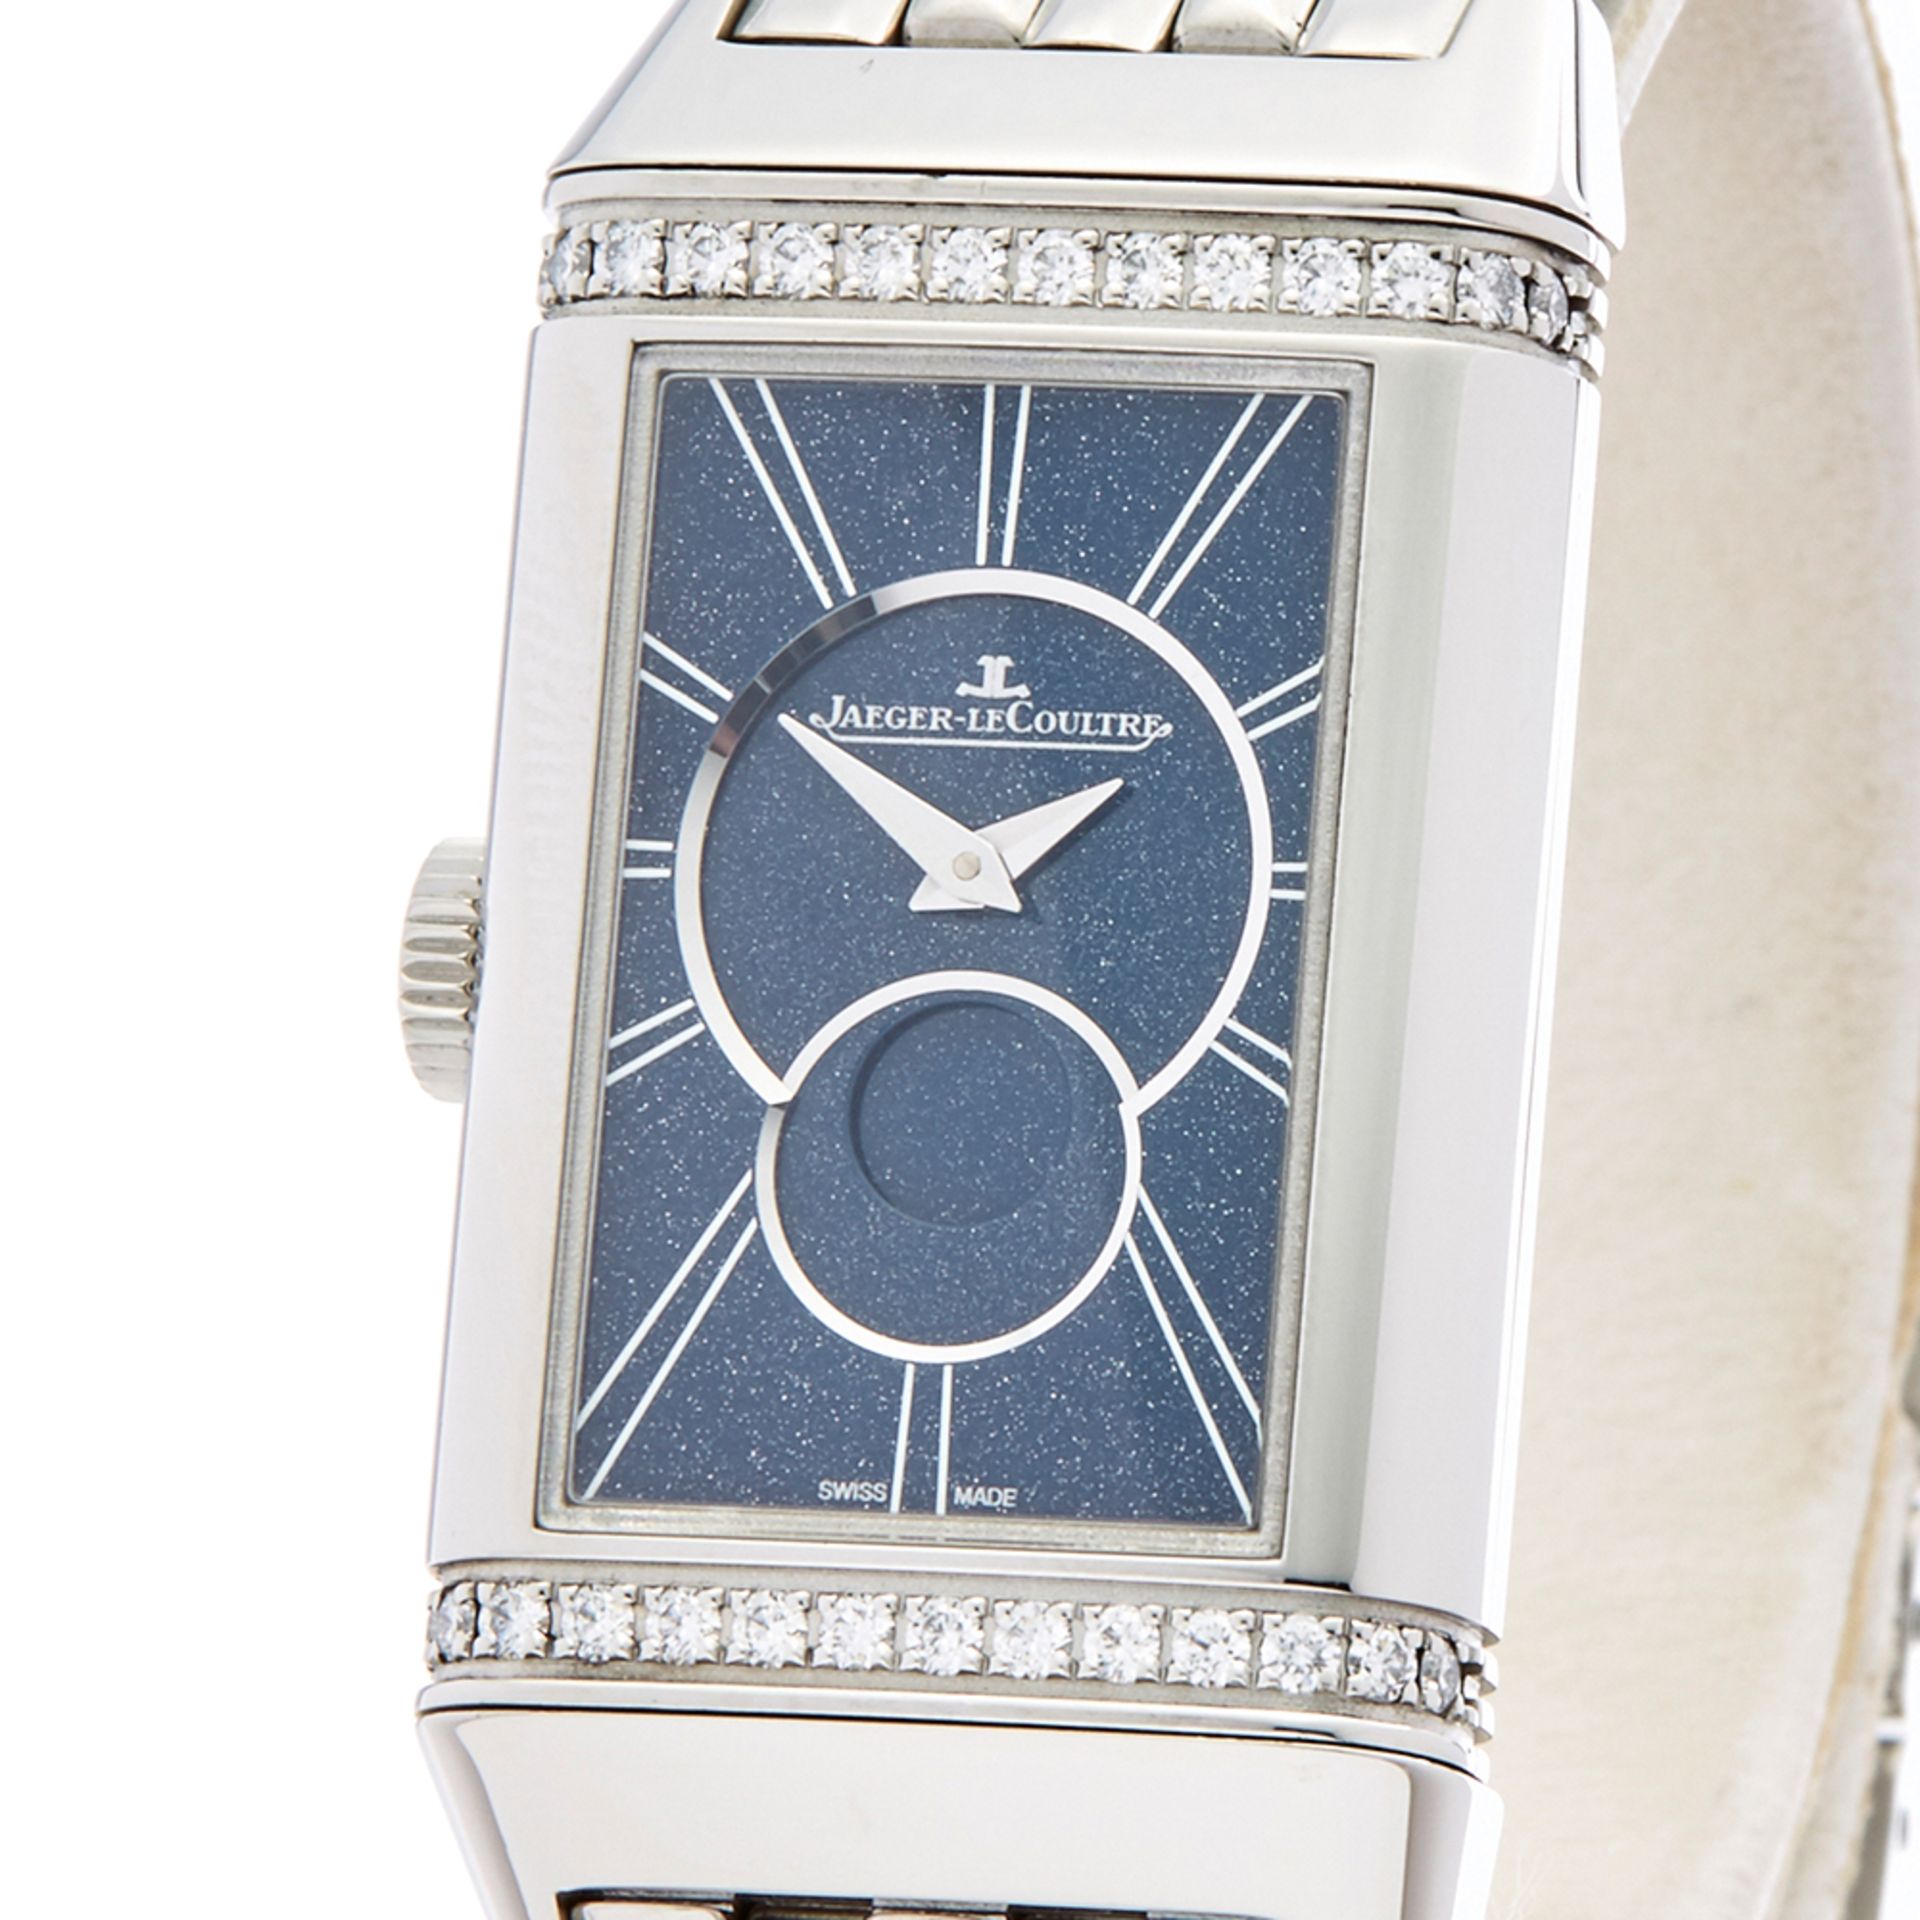 Jaeger-LeCoultre Reverso One Duetto Stainless Steel - Q3358420 - Image 5 of 9